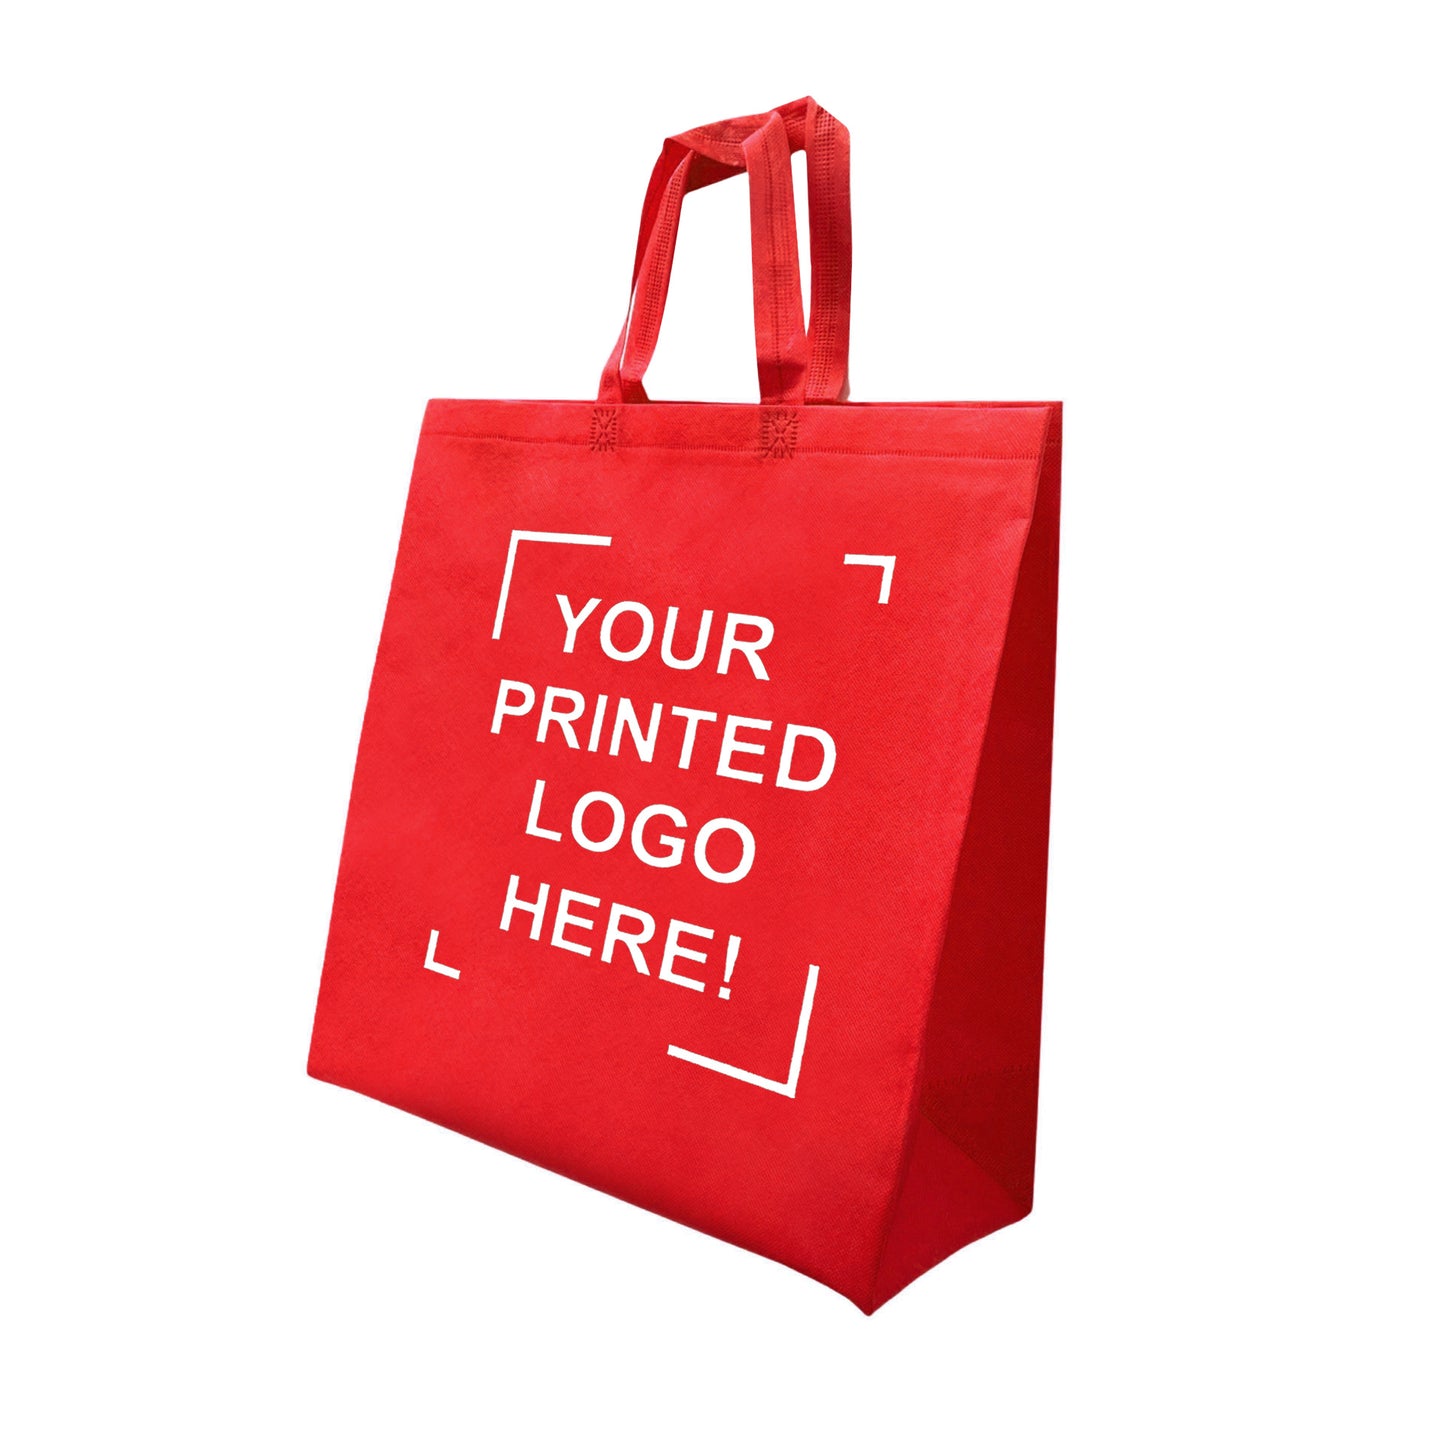 200pcs, Non-Woven Reusable Grocer Bag 15.5x6x15.5 inches Red Shopping Bags Flat Handles, One Color Custom Print, Printed in Canada